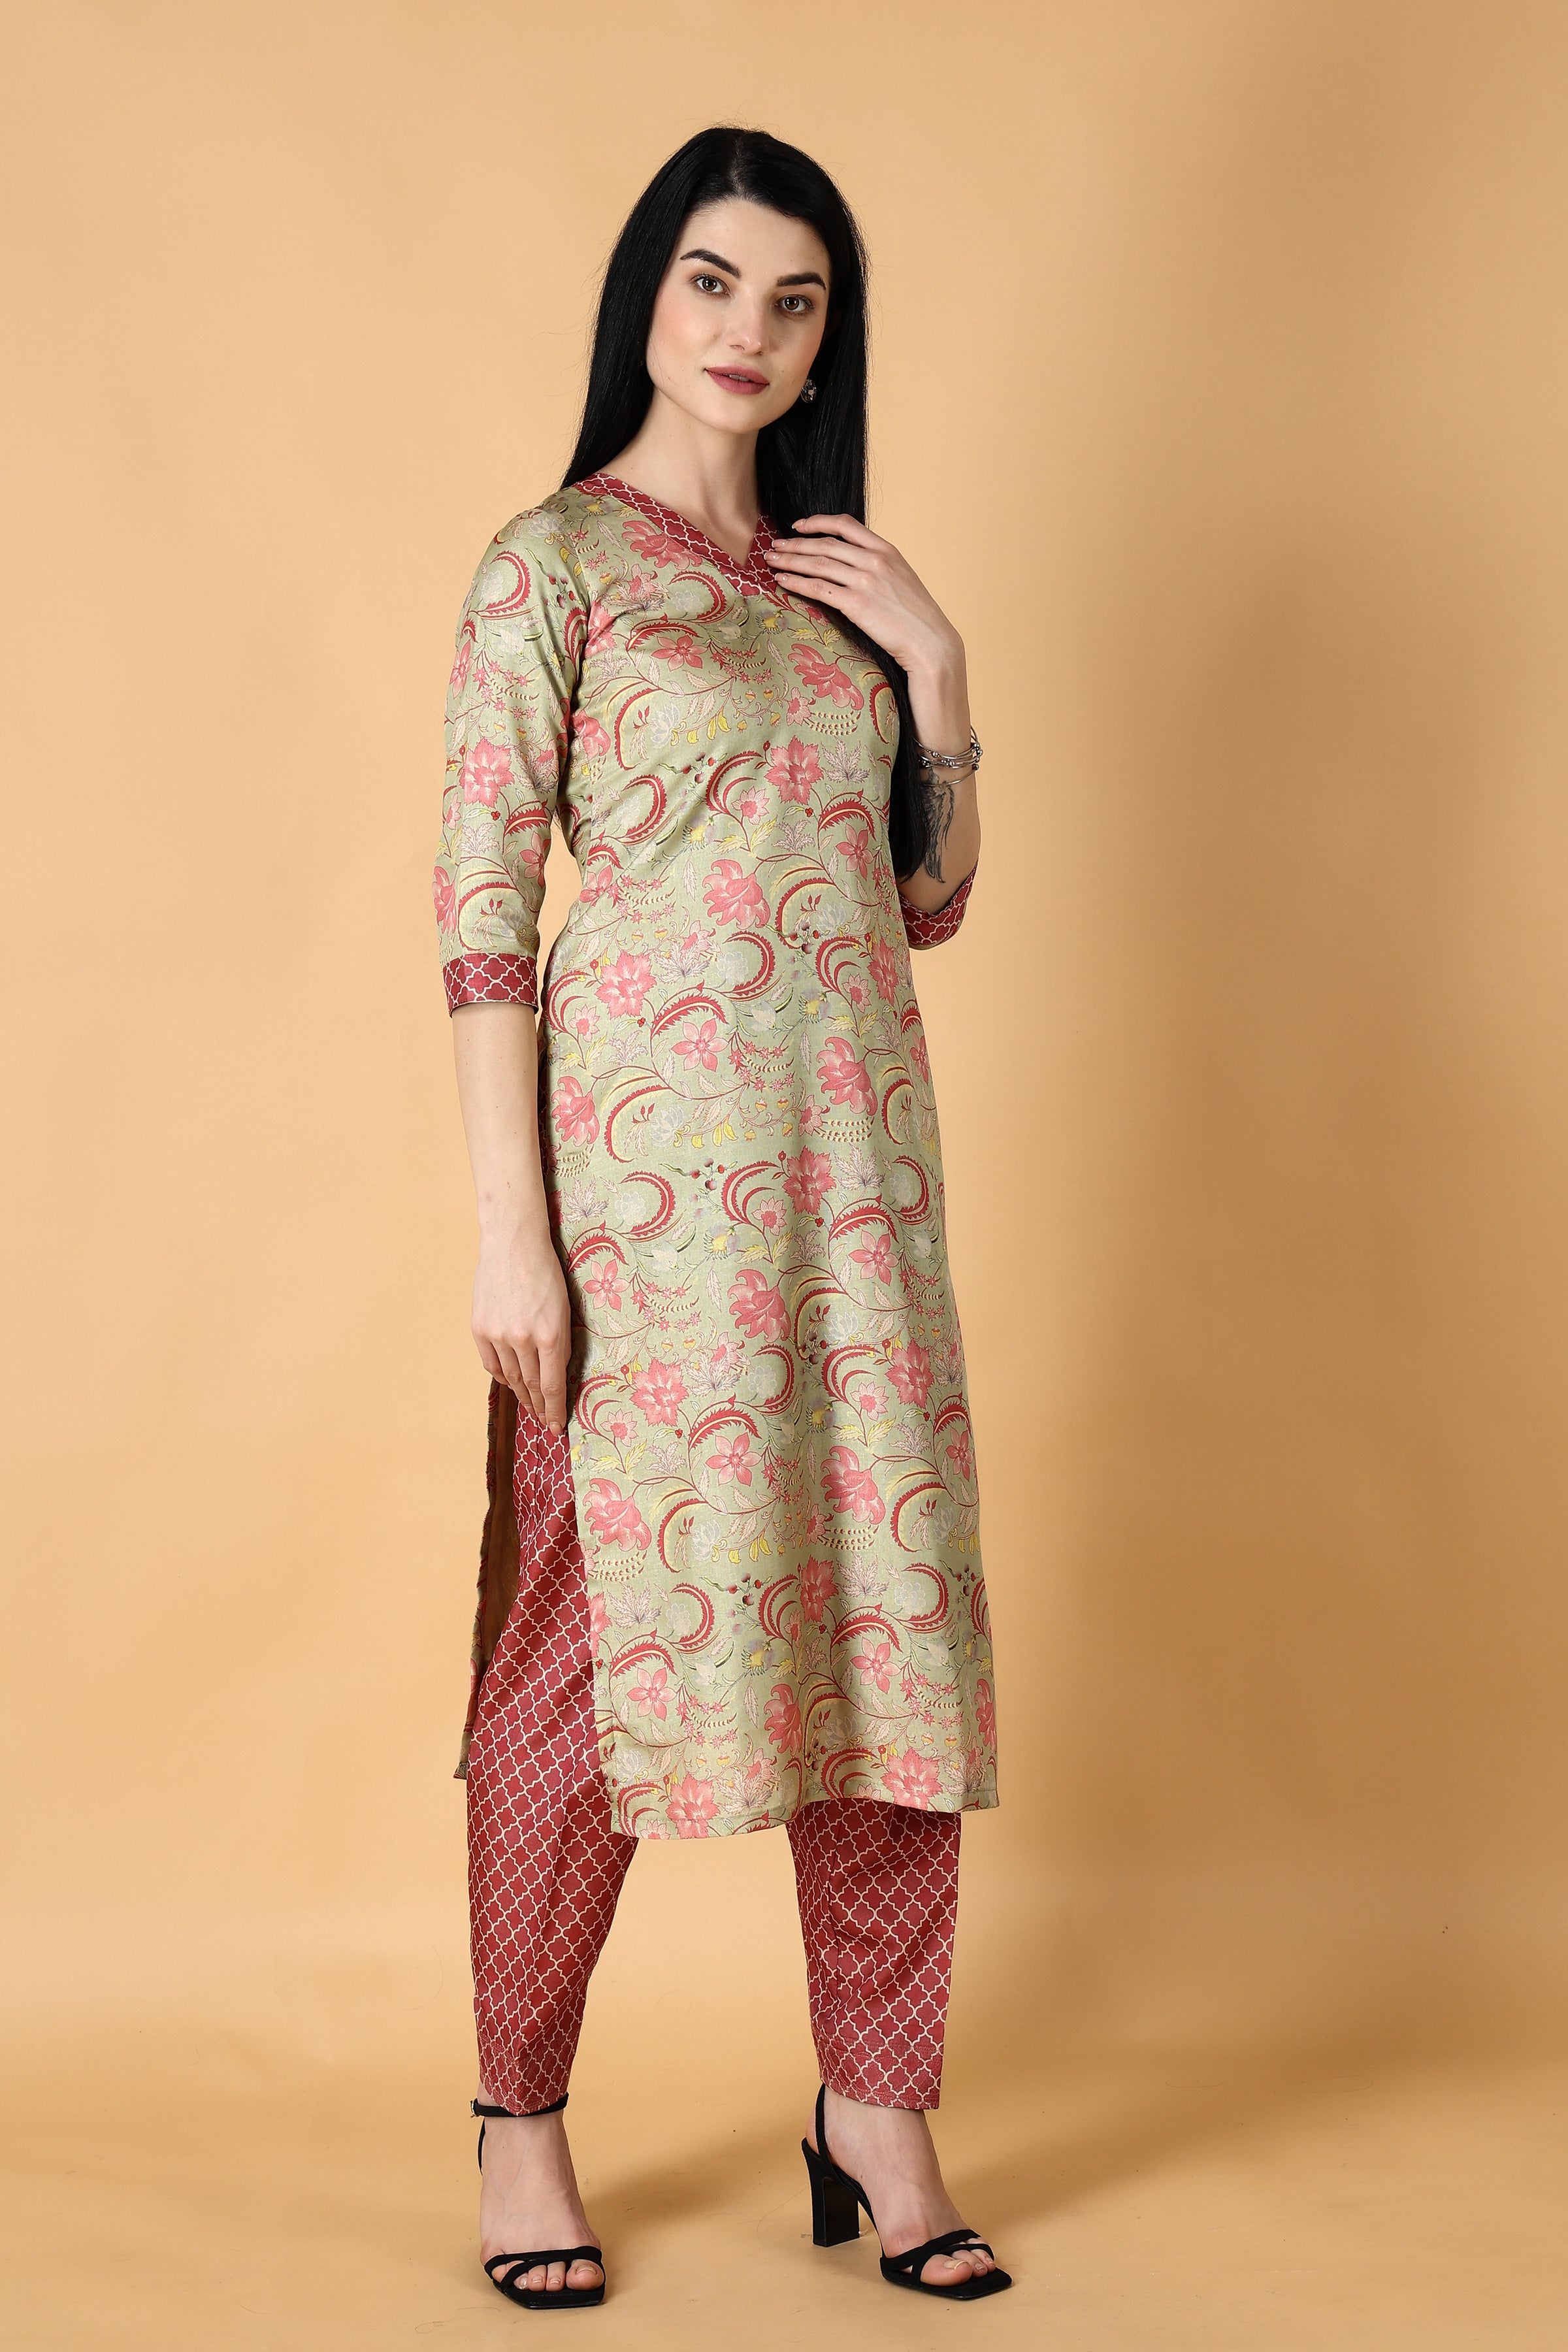 Green Colour Rayon Silk Kurti With Beautiful Aari Embroidery Gives  Attractive Look To The Wearer. at Rs 1999.00 | Jammu| ID: 2851419956162